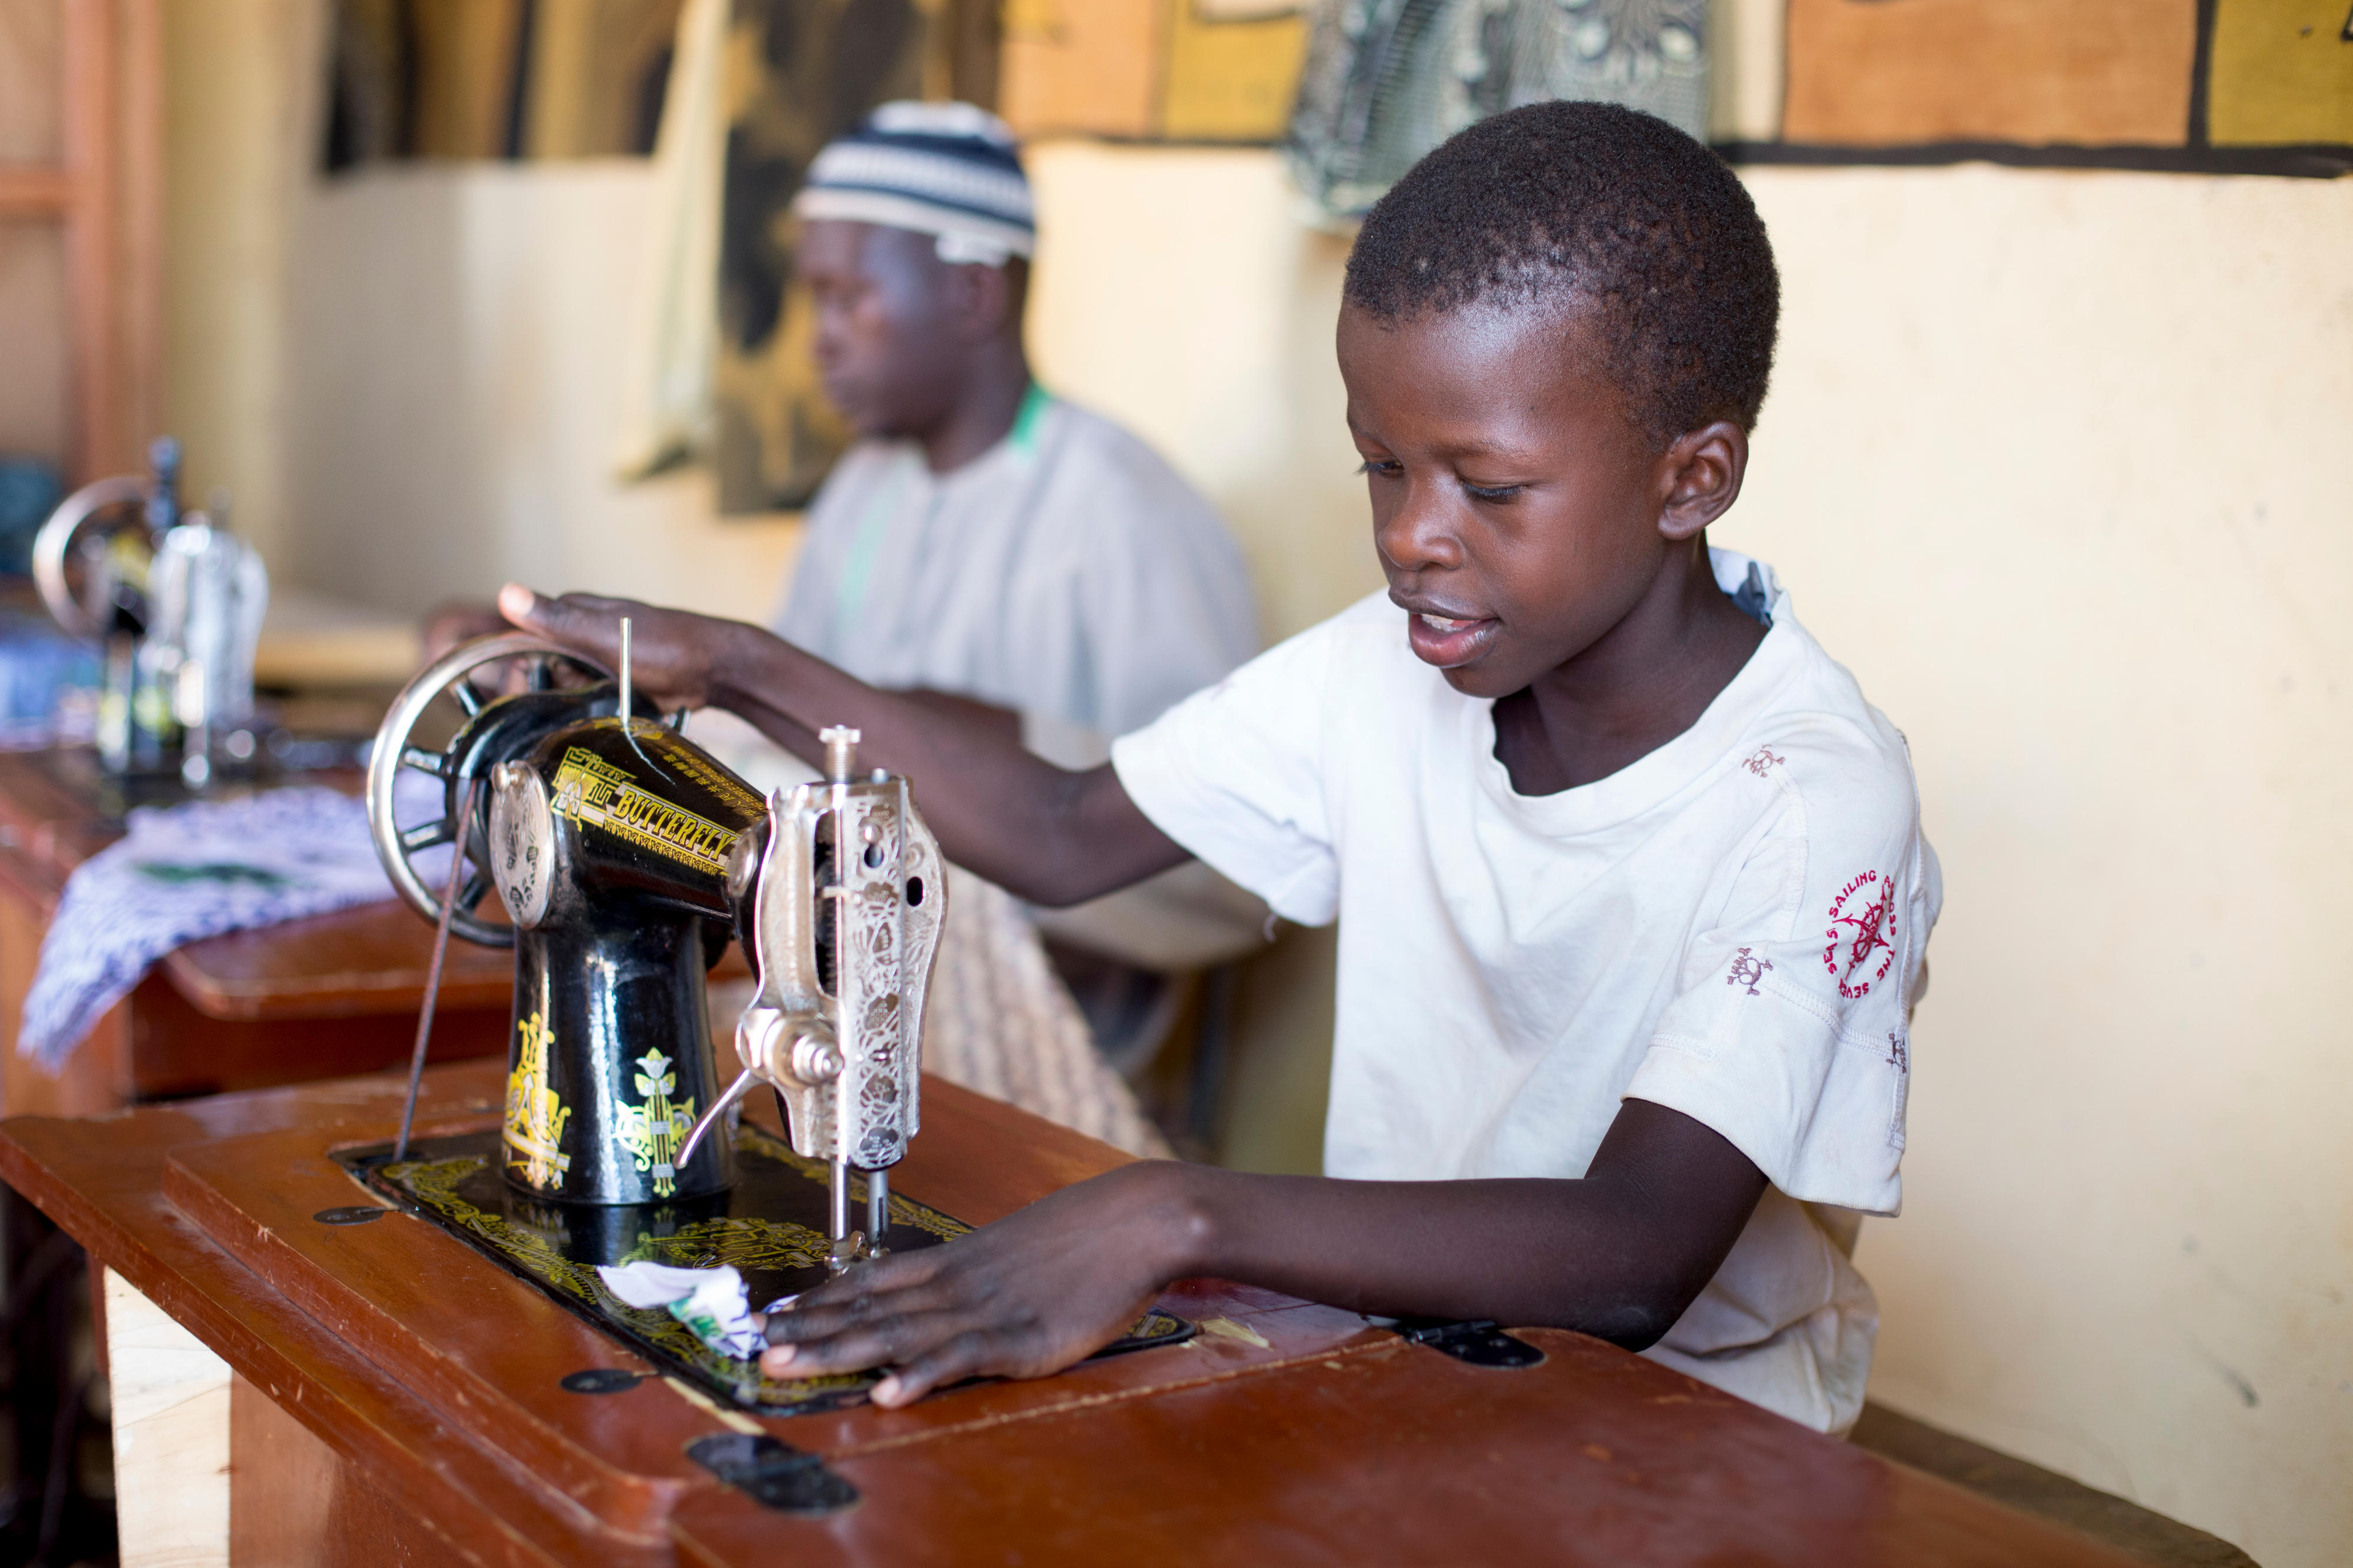 A boy in Mali working with a sewing machine